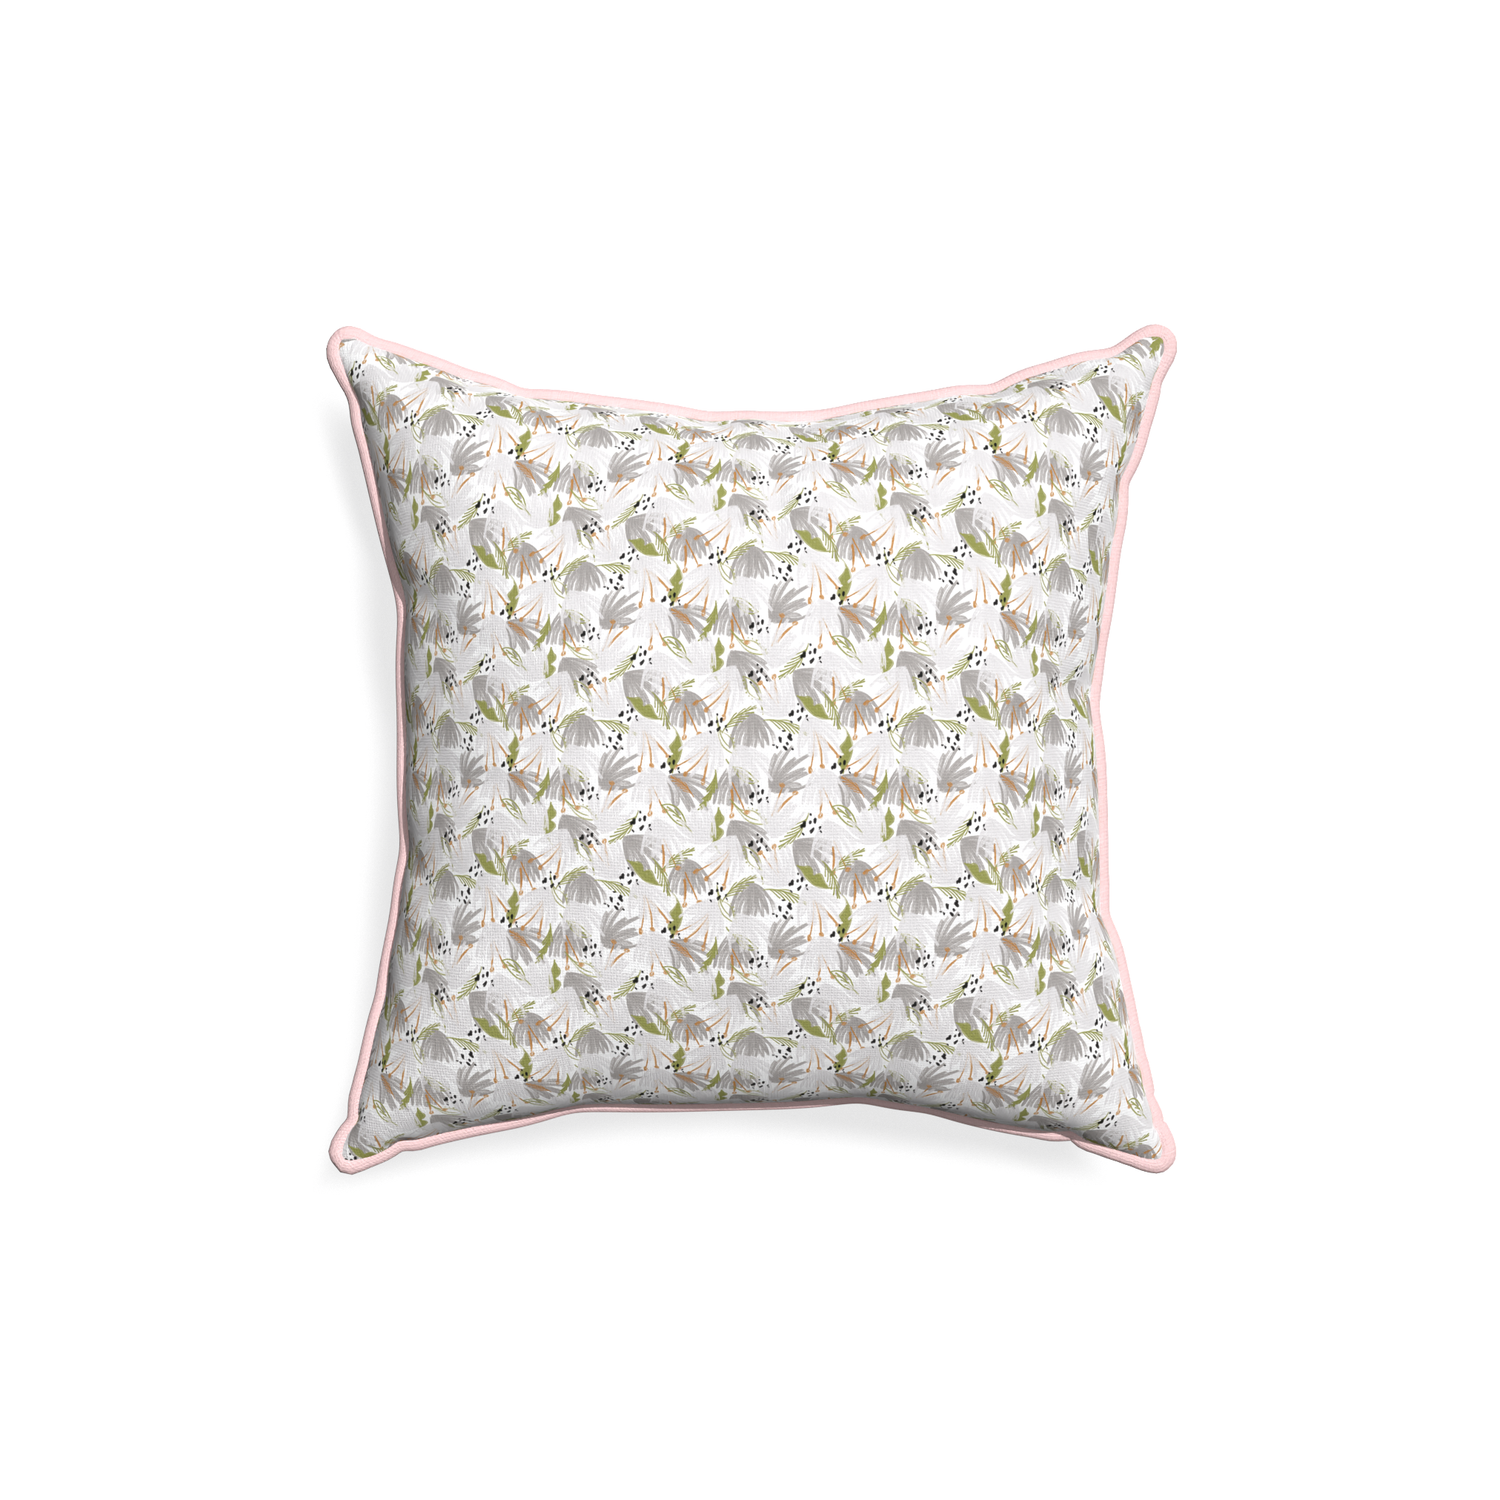 18-square eden grey custom pillow with petal piping on white background